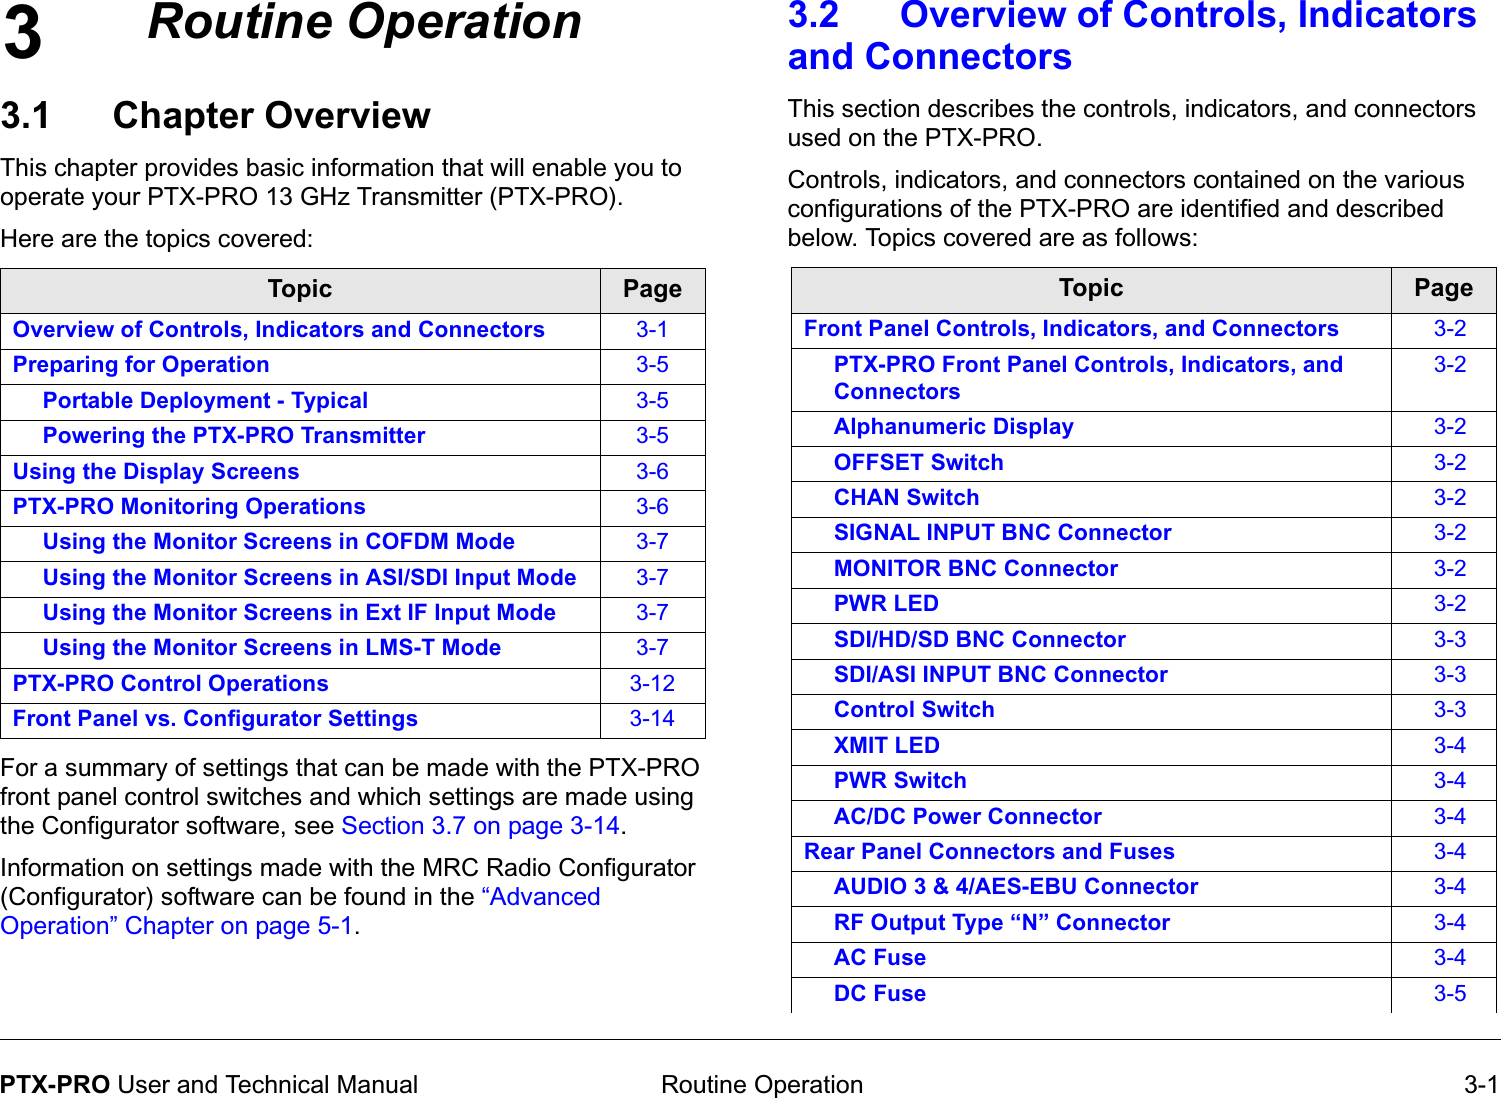 3 Routine Operation 3-1PTX-PRO User and Technical ManualRoutine Operation3.1 Chapter OverviewThis chapter provides basic information that will enable you to operate your PTX-PRO 13 GHz Transmitter (PTX-PRO). Here are the topics covered:  For a summary of settings that can be made with the PTX-PRO front panel control switches and which settings are made using the Configurator software, see Section 3.7 on page 3-14.Information on settings made with the MRC Radio Configurator (Configurator) software can be found in the “Advanced Operation” Chapter on page 5-1.Topic PageOverview of Controls, Indicators and Connectors 3-1Preparing for Operation 3-5Portable Deployment - Typical 3-5Powering the PTX-PRO Transmitter 3-5Using the Display Screens 3-6PTX-PRO Monitoring Operations 3-6Using the Monitor Screens in COFDM Mode 3-7Using the Monitor Screens in ASI/SDI Input Mode 3-7Using the Monitor Screens in Ext IF Input Mode 3-7Using the Monitor Screens in LMS-T Mode 3-7PTX-PRO Control Operations 3-12Front Panel vs. Configurator Settings 3-143.2 Overview of Controls, Indicators and Connectors This section describes the controls, indicators, and connectors used on the PTX-PRO. Controls, indicators, and connectors contained on the various configurations of the PTX-PRO are identified and described below. Topics covered are as follows:  Topic PageFront Panel Controls, Indicators, and Connectors 3-2PTX-PRO Front Panel Controls, Indicators, and Connectors3-2Alphanumeric Display 3-2OFFSET Switch 3-2CHAN Switch 3-2SIGNAL INPUT BNC Connector 3-2MONITOR BNC Connector 3-2PWR LED 3-2SDI/HD/SD BNC Connector 3-3SDI/ASI INPUT BNC Connector 3-3Control Switch 3-3XMIT LED 3-4PWR Switch 3-4AC/DC Power Connector 3-4Rear Panel Connectors and Fuses 3-4AUDIO 3 &amp; 4/AES-EBU Connector 3-4RF Output Type “N” Connector 3-4AC Fuse 3-4DC Fuse 3-5